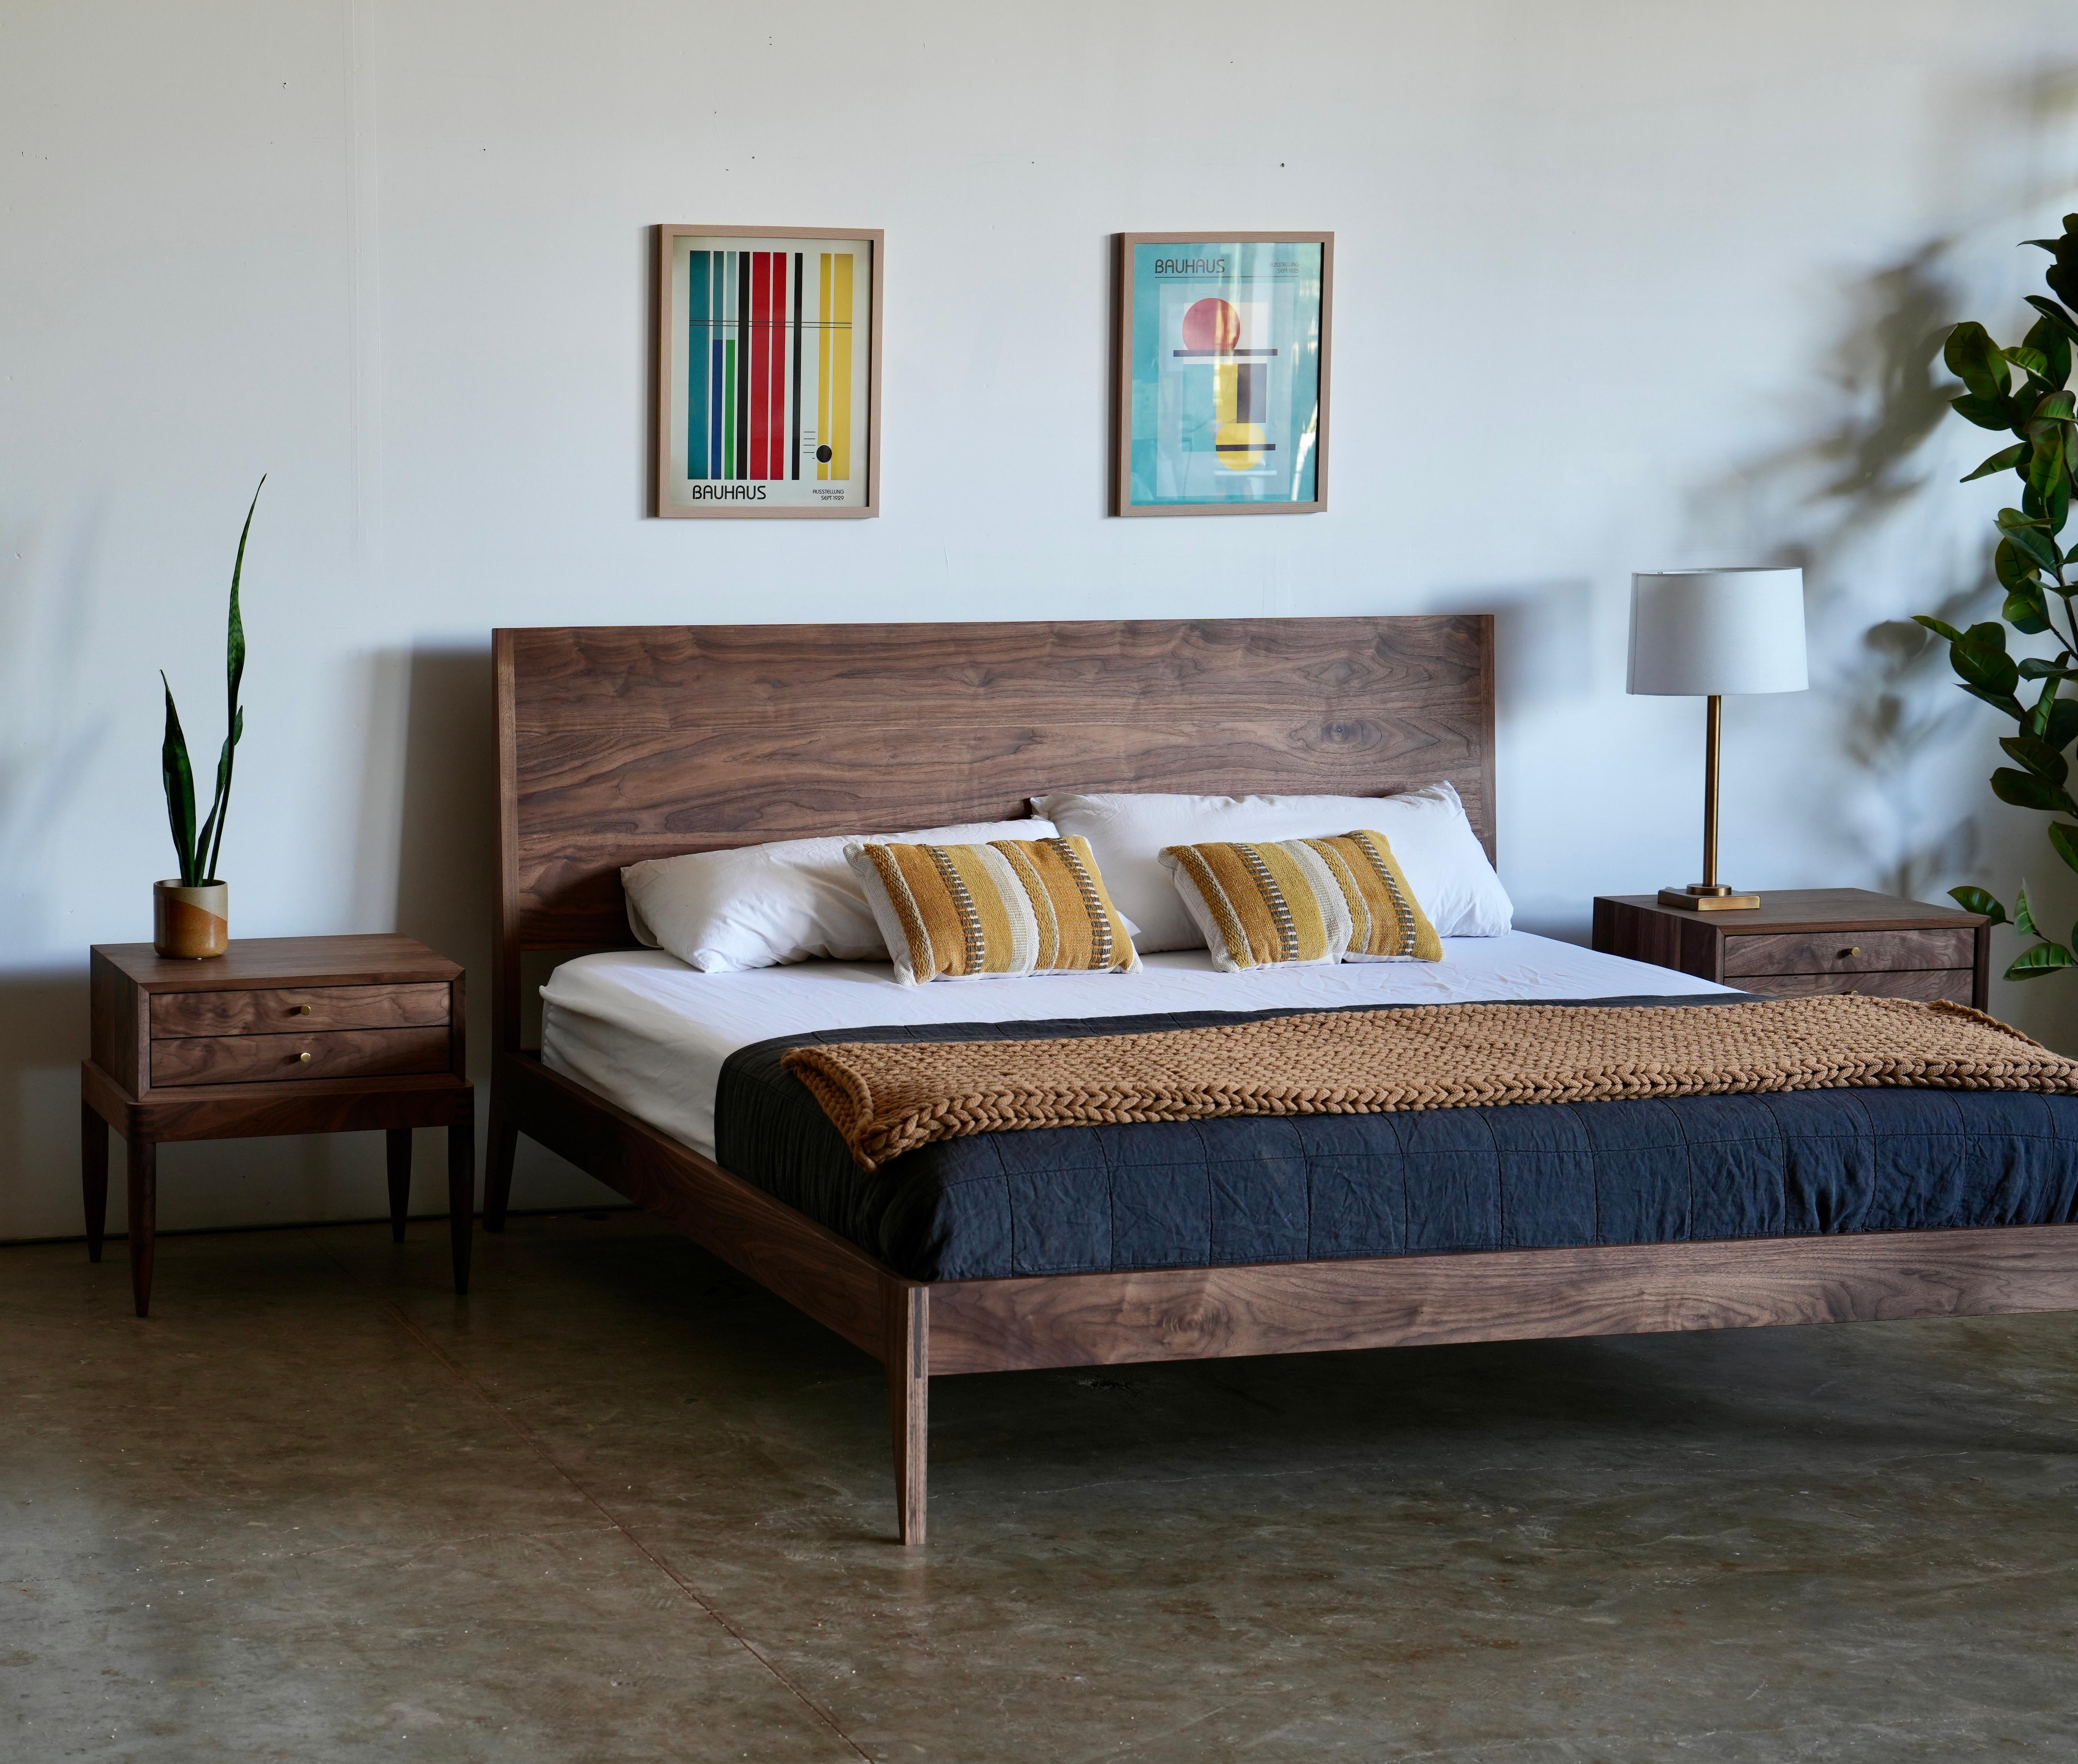 Bed No. 2

Featuring strong lines, exposed joinery and an enjoyably slanted headboard.

This bed exhibits clean, coherent lines with angles reminiscent of the mid century era, but brought into a contemporary and modern design. The details include